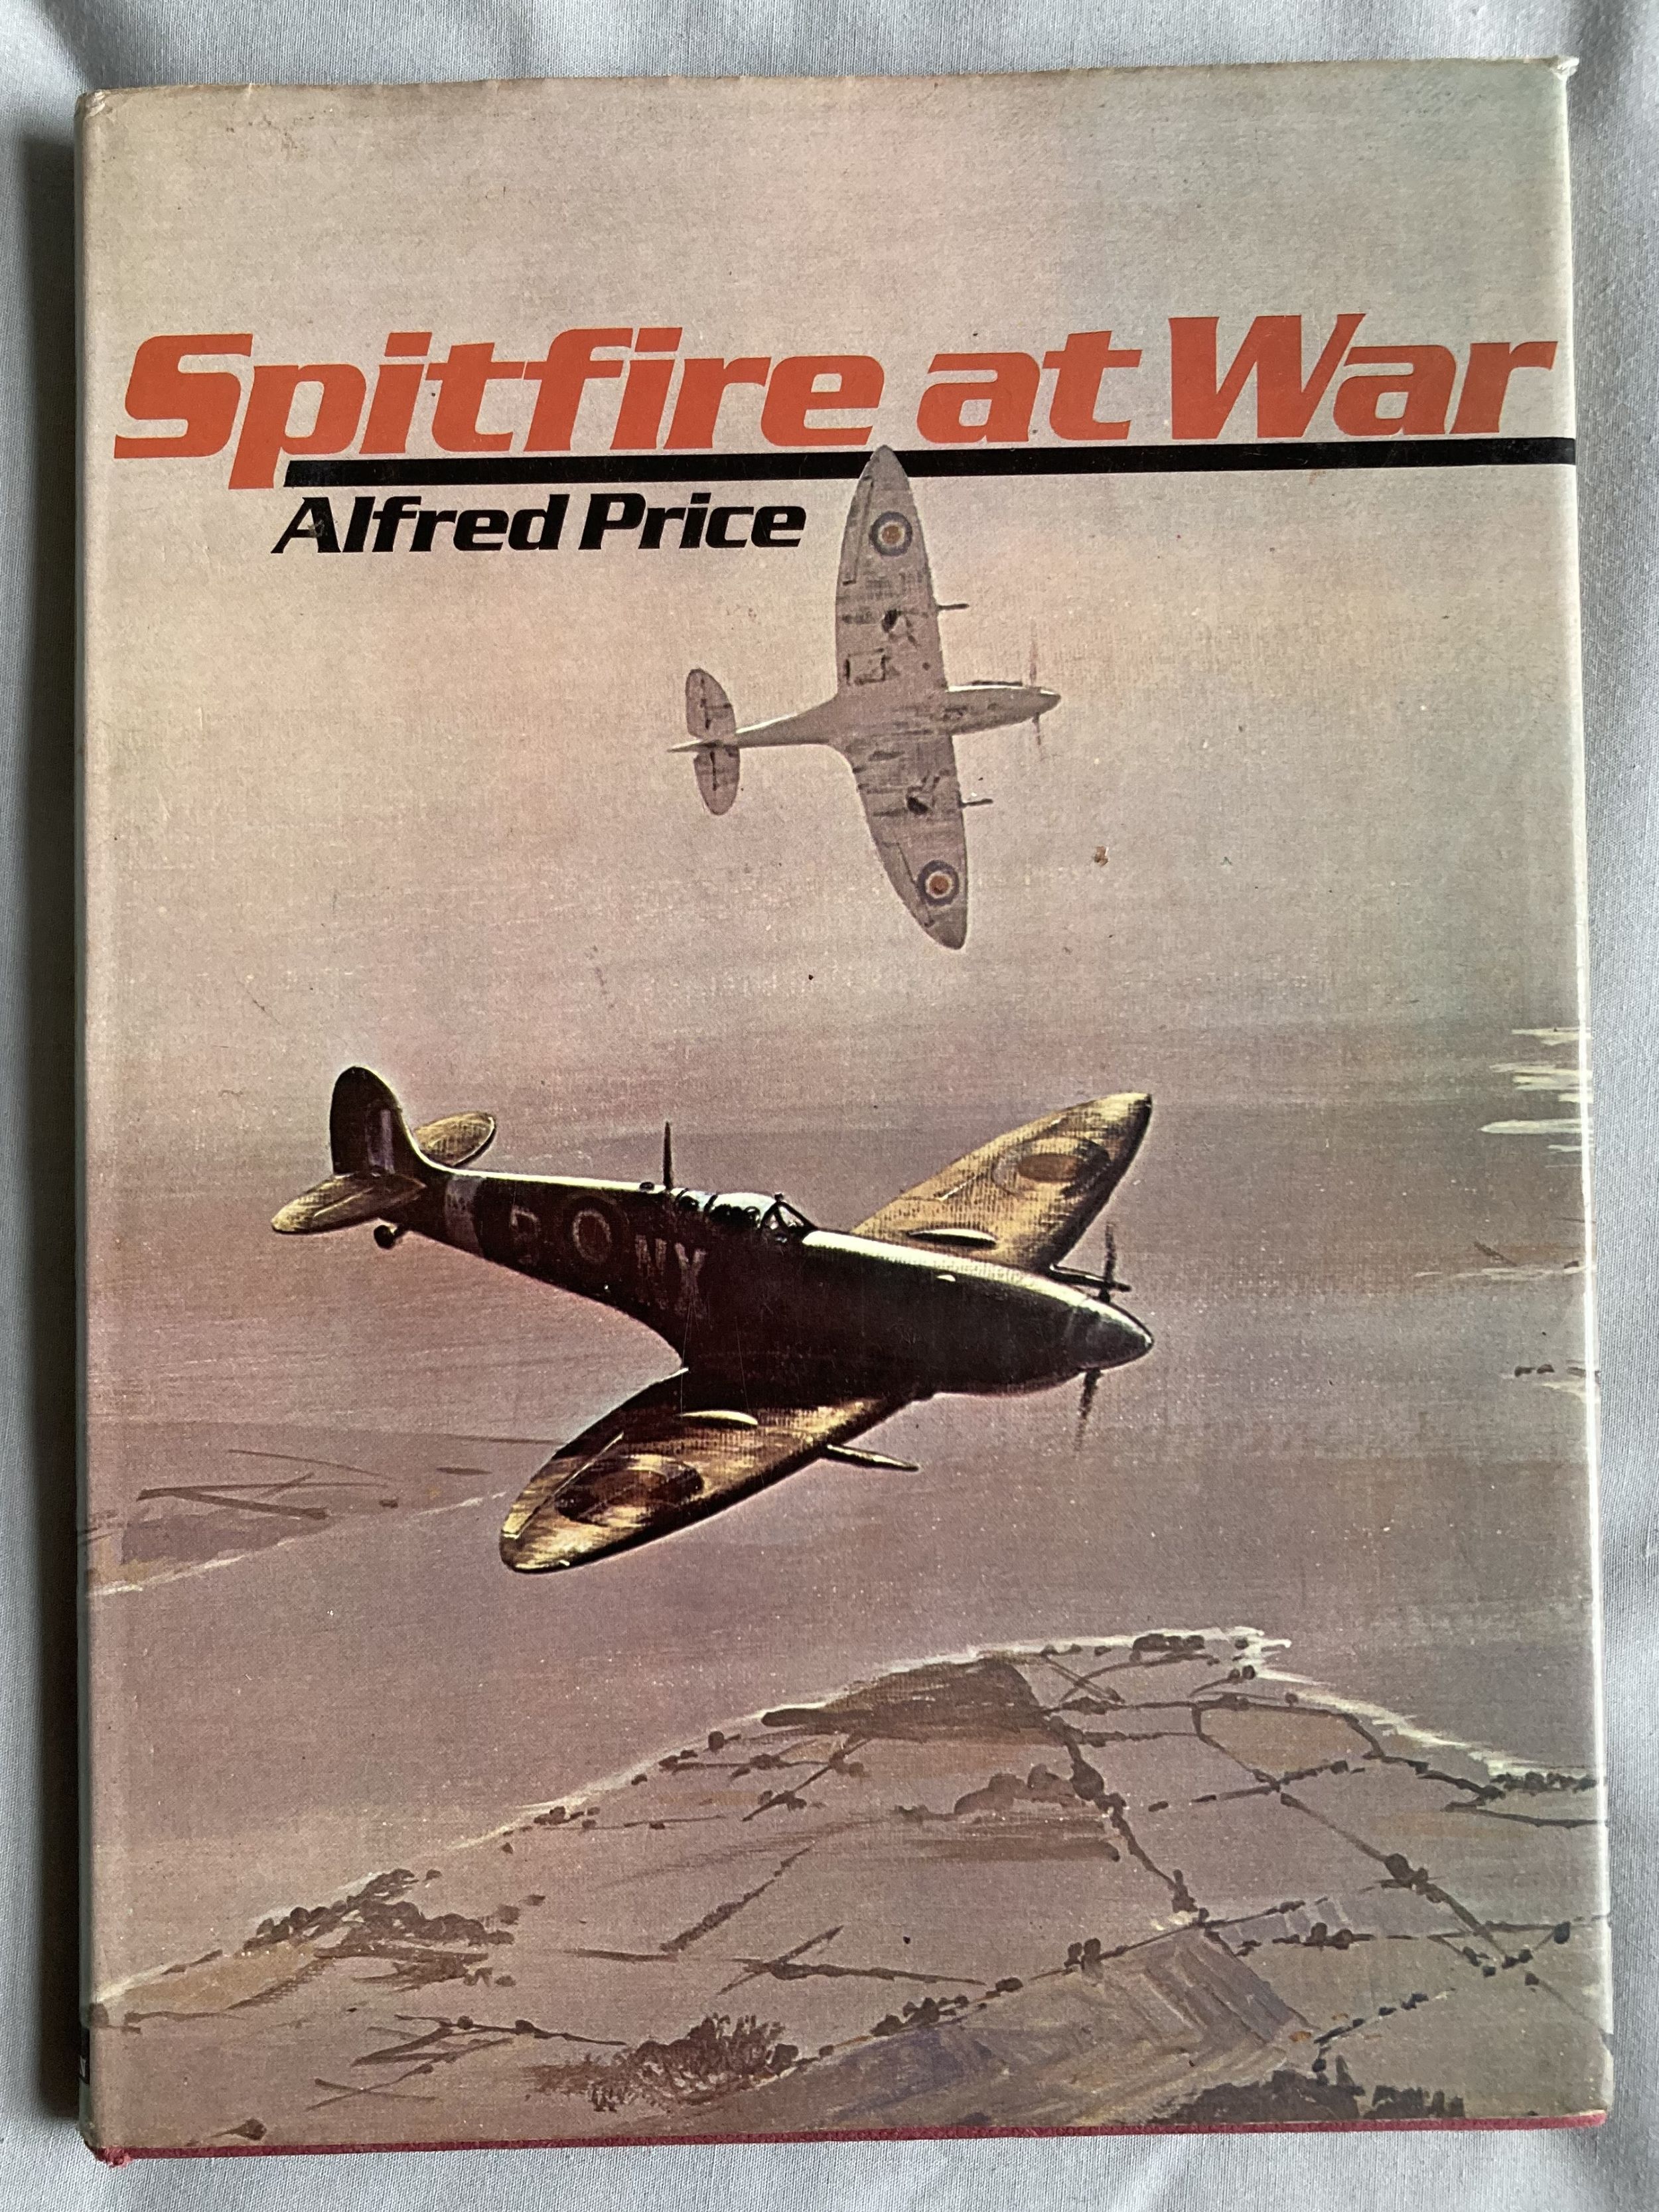 WW2 Spitfire at War multiple signed hardback book by Alfred Price. Bookplate inside signed by six